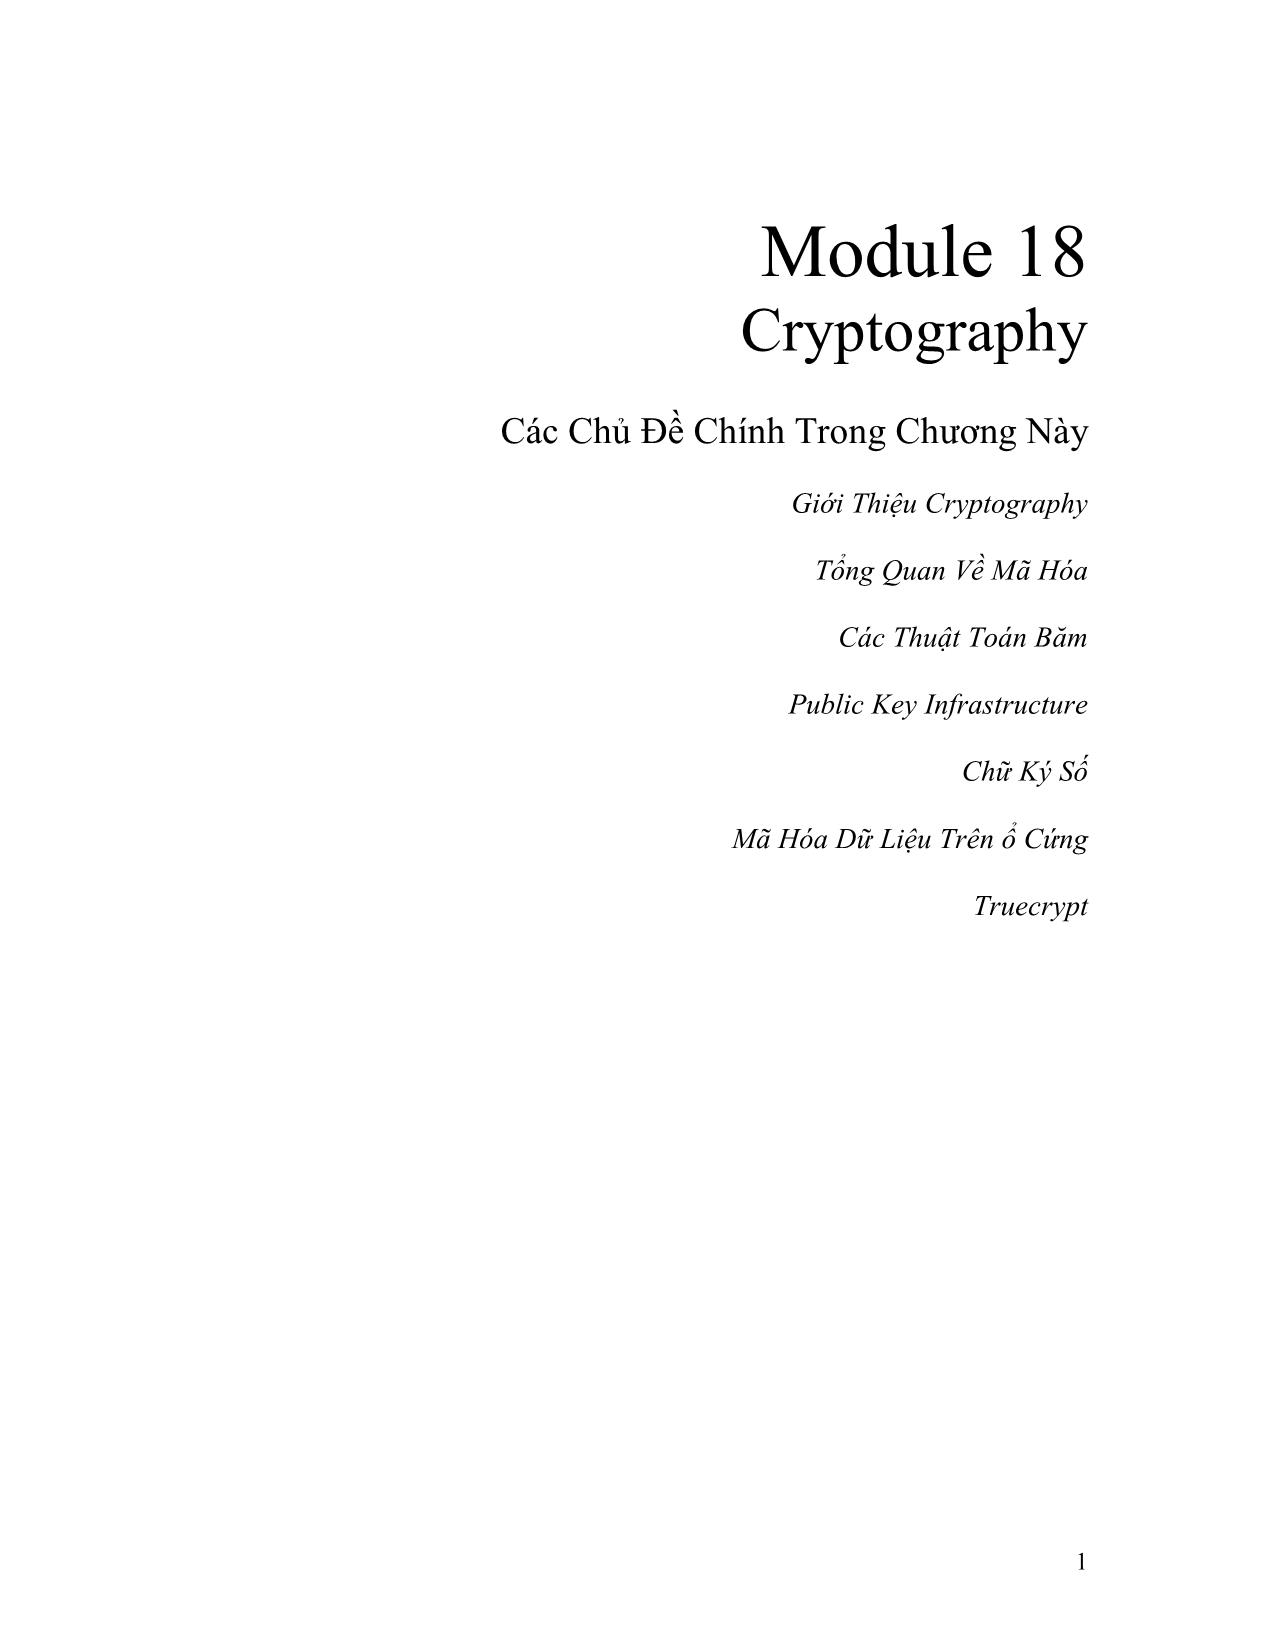 Module 18: Cryptography trang 1